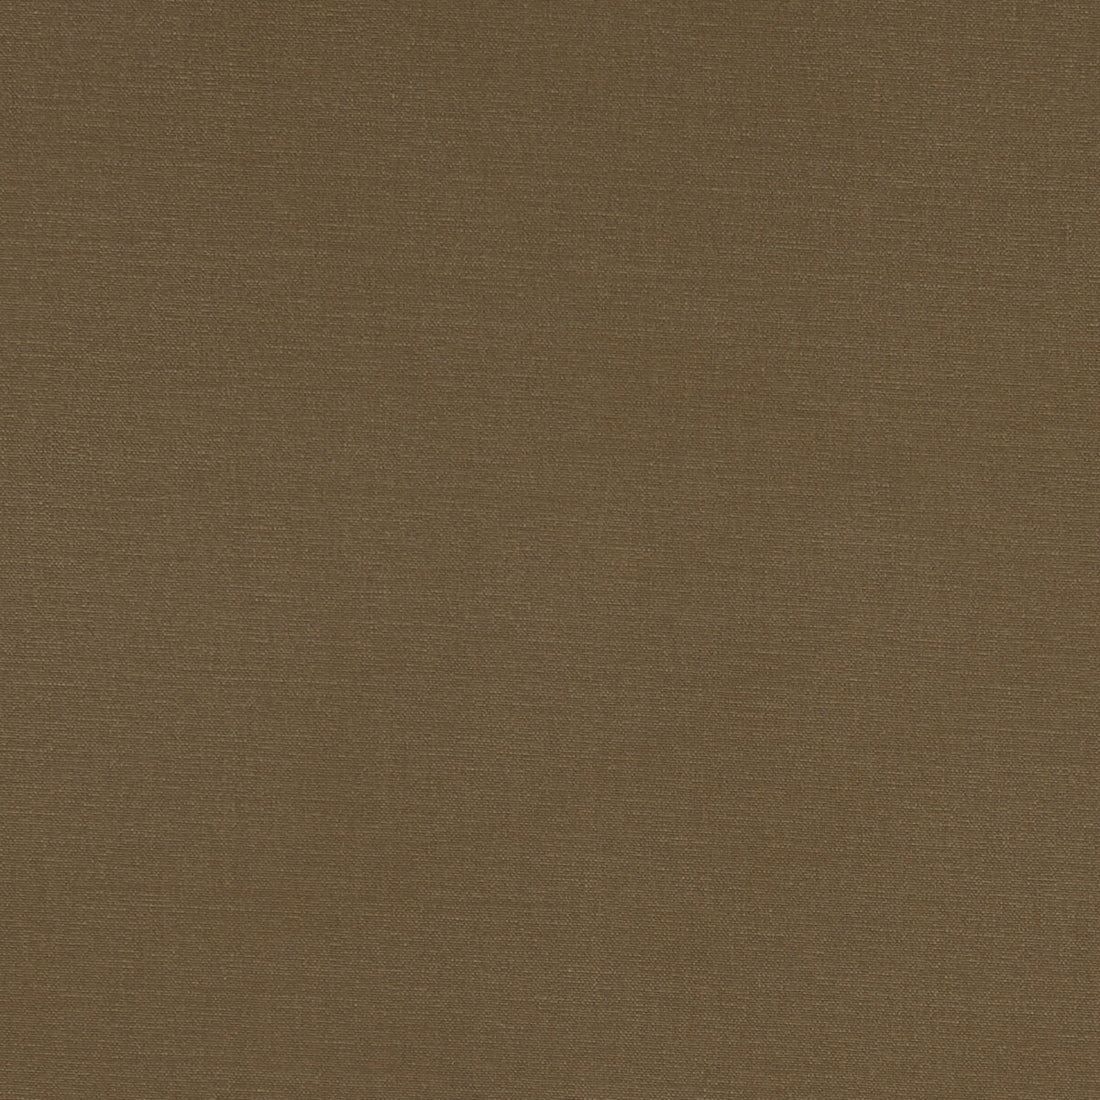 Alora fabric in cocoa color - pattern F1097/11.CAC.0 - by Clarke And Clarke in the Alora By Studio G For C&amp;C collection